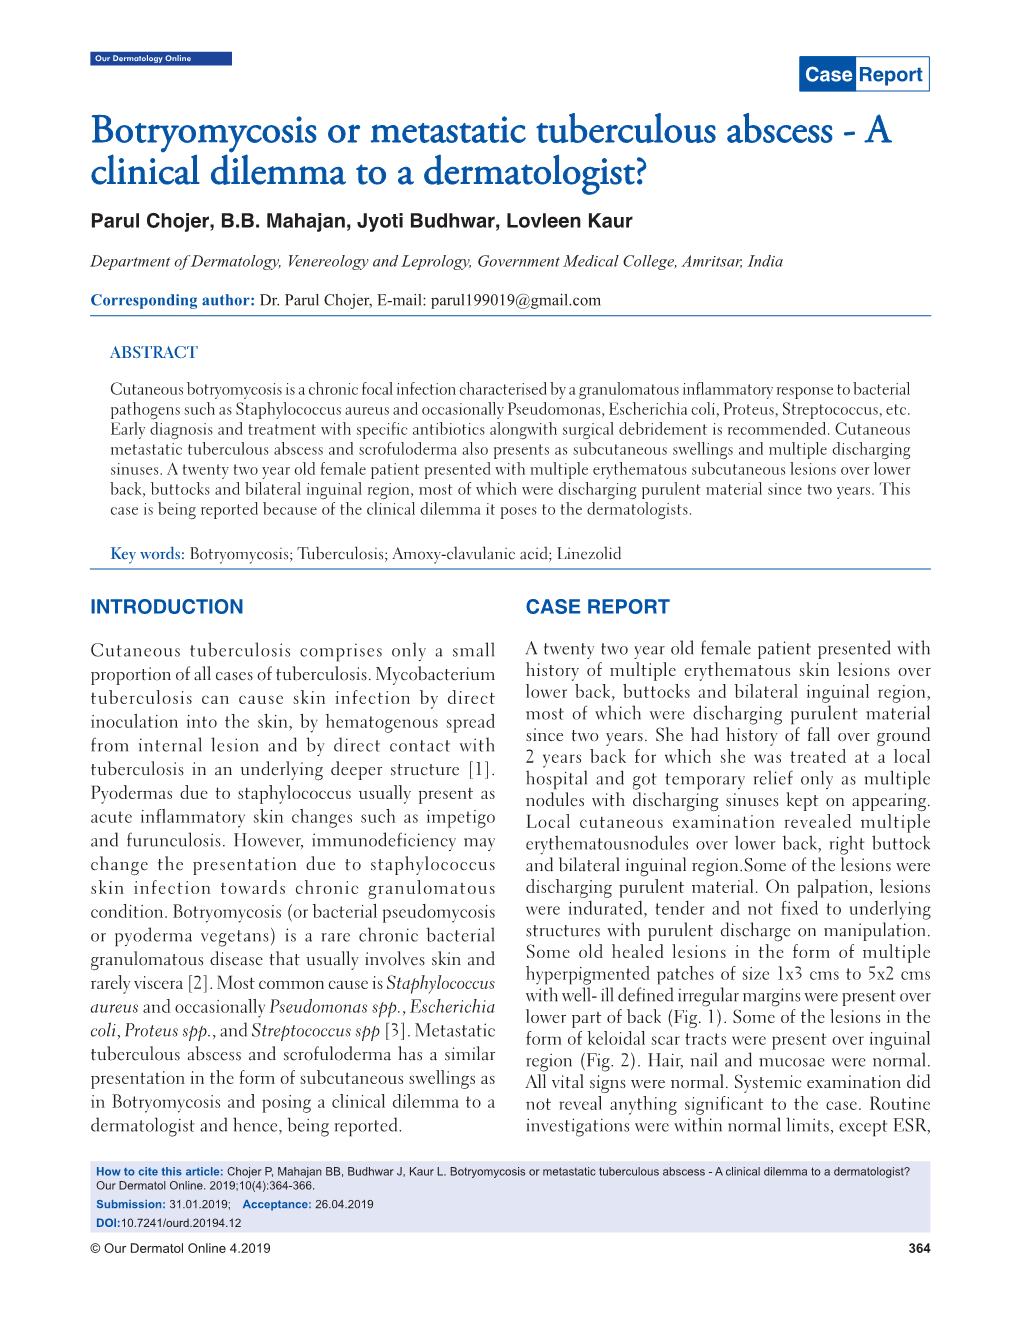 Botryomycosis Or Metastatic Tuberculous Abscess - a Clinical Dilemma to a Dermatologist? Our Dermatol Online